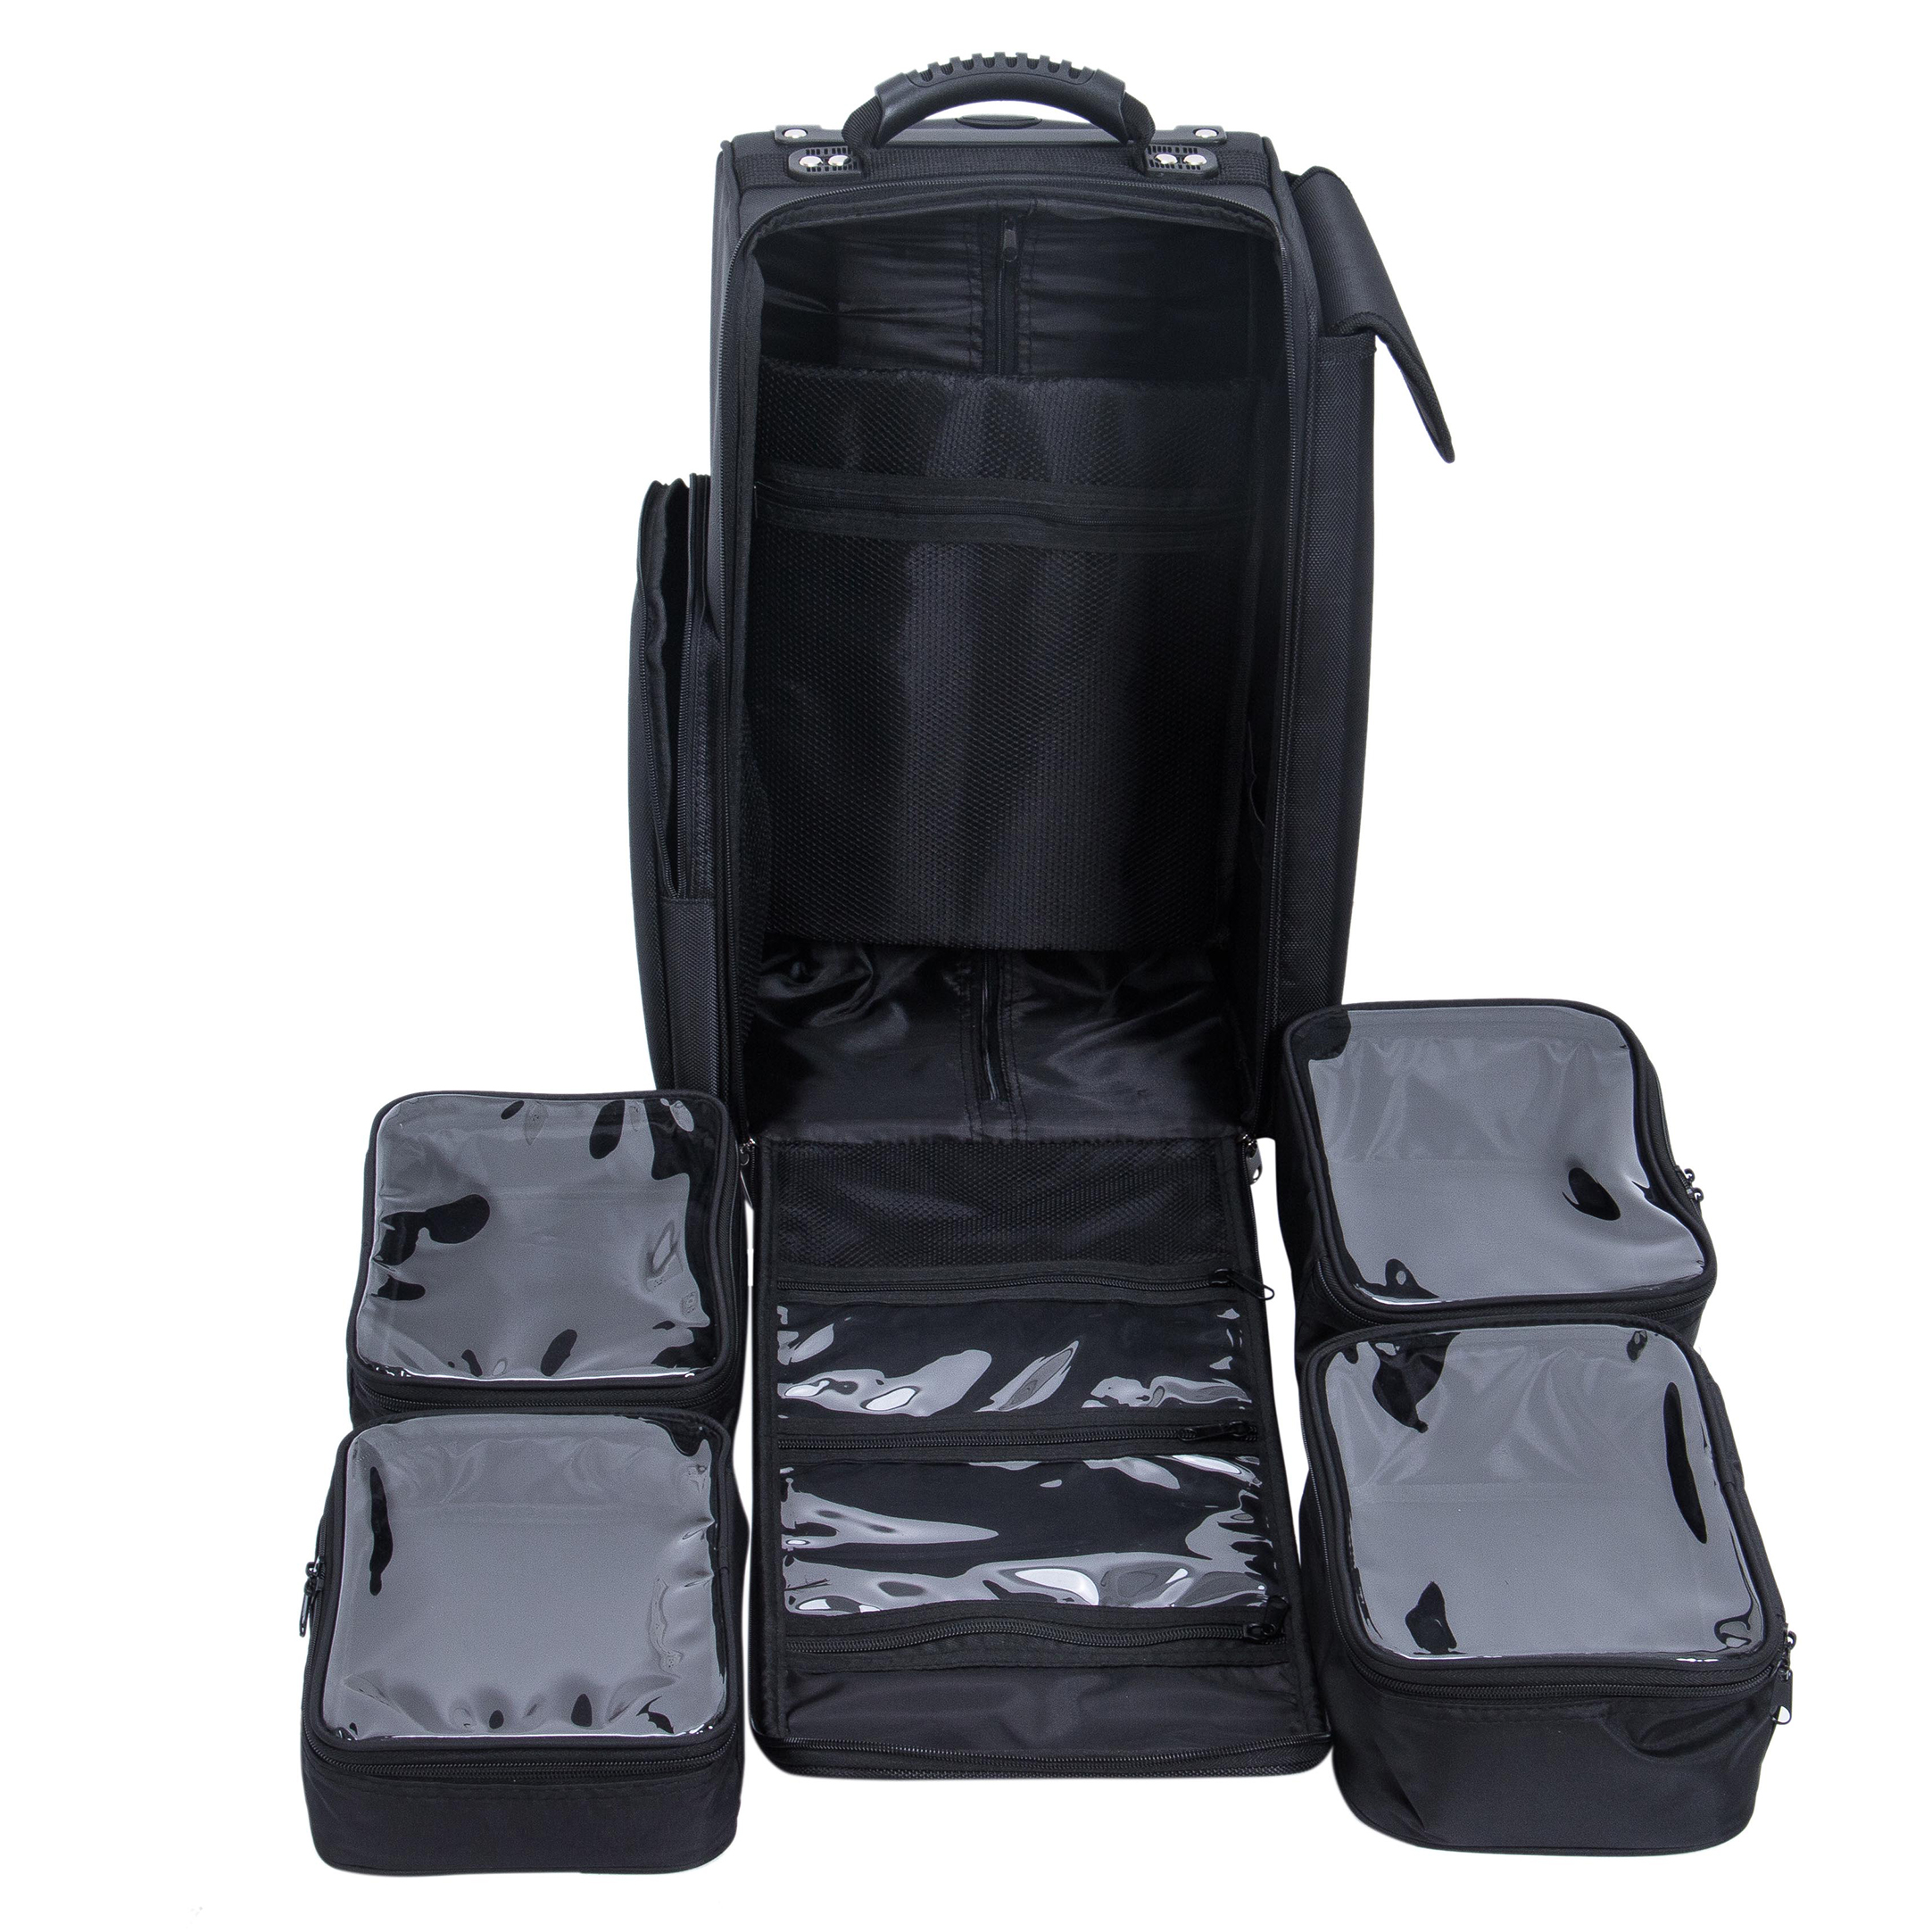 Rolling Beauty case with extra organizer bags - 5866102 MAKE UP - MANICURE - HAIRDRESSING CASES